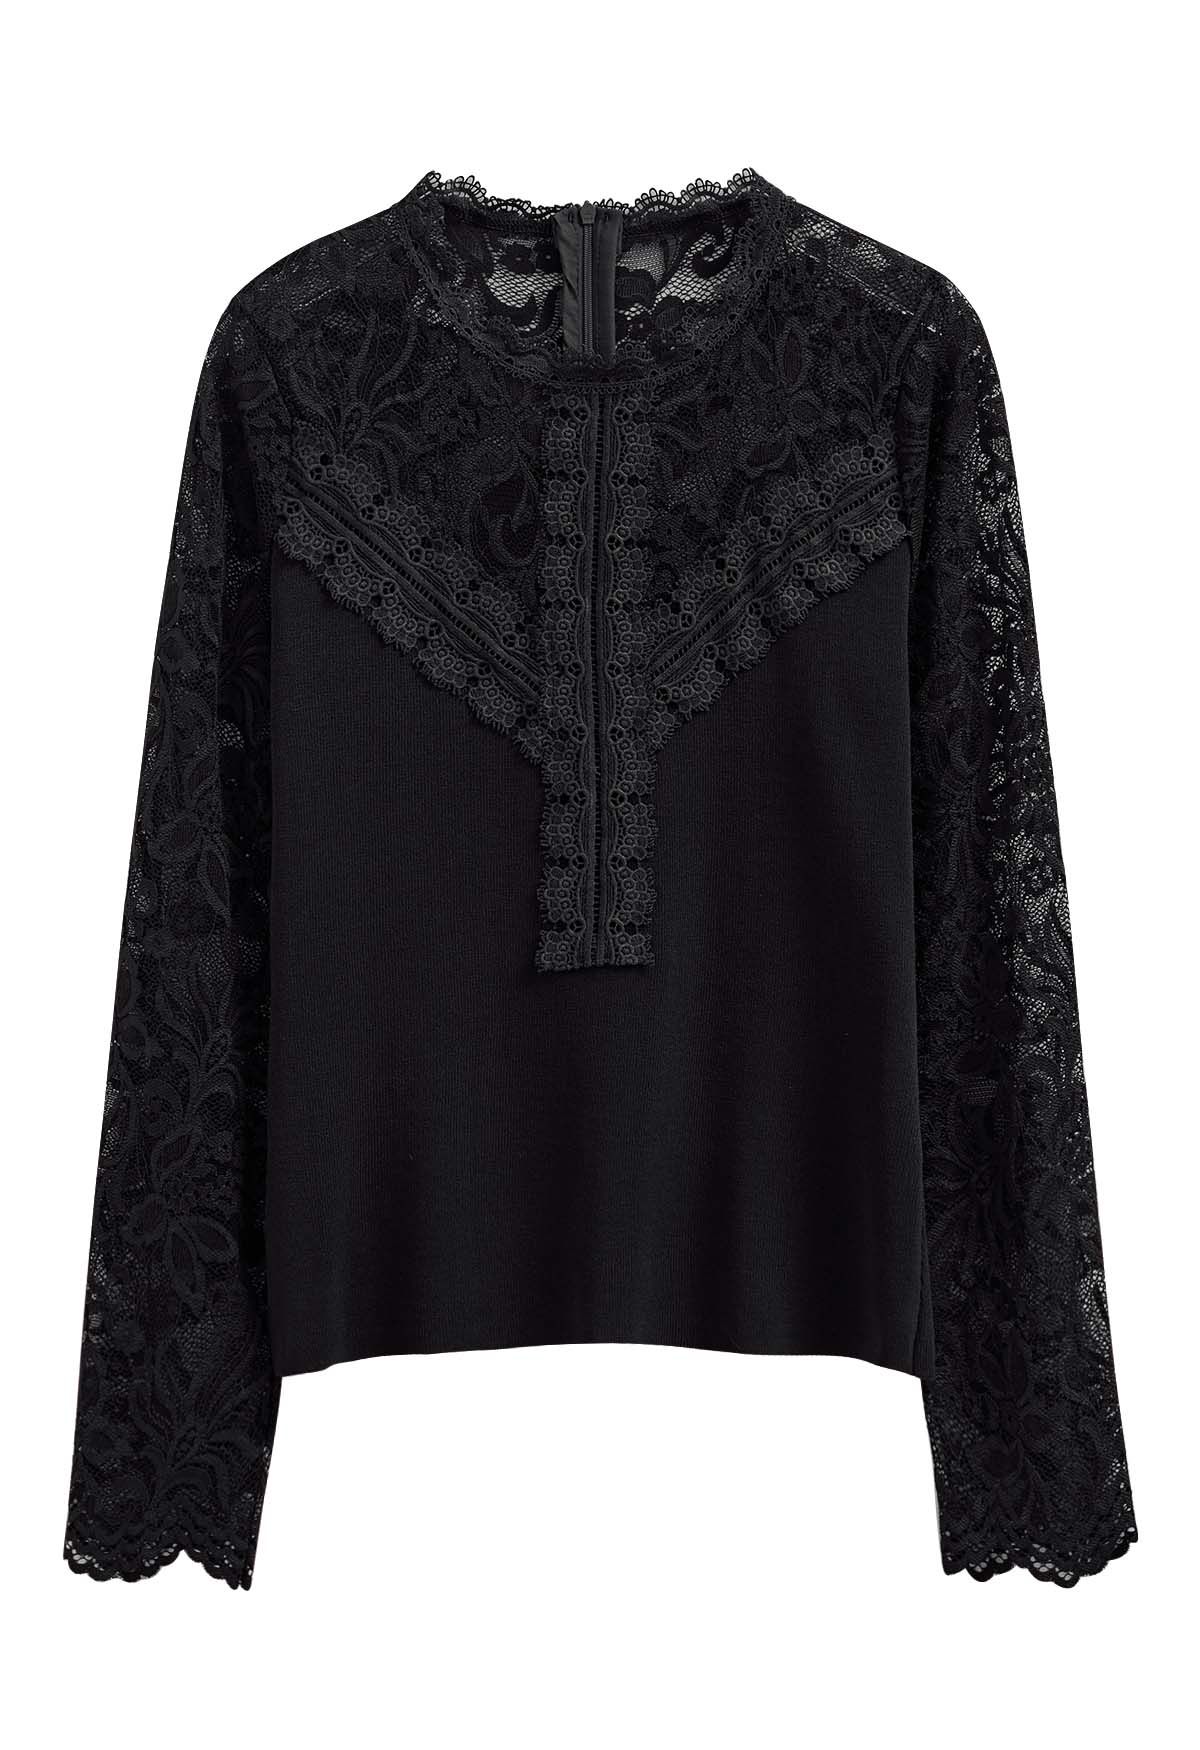 Ethereal Floral Lace Spliced Knit Top in Black - Retro, Indie and ...